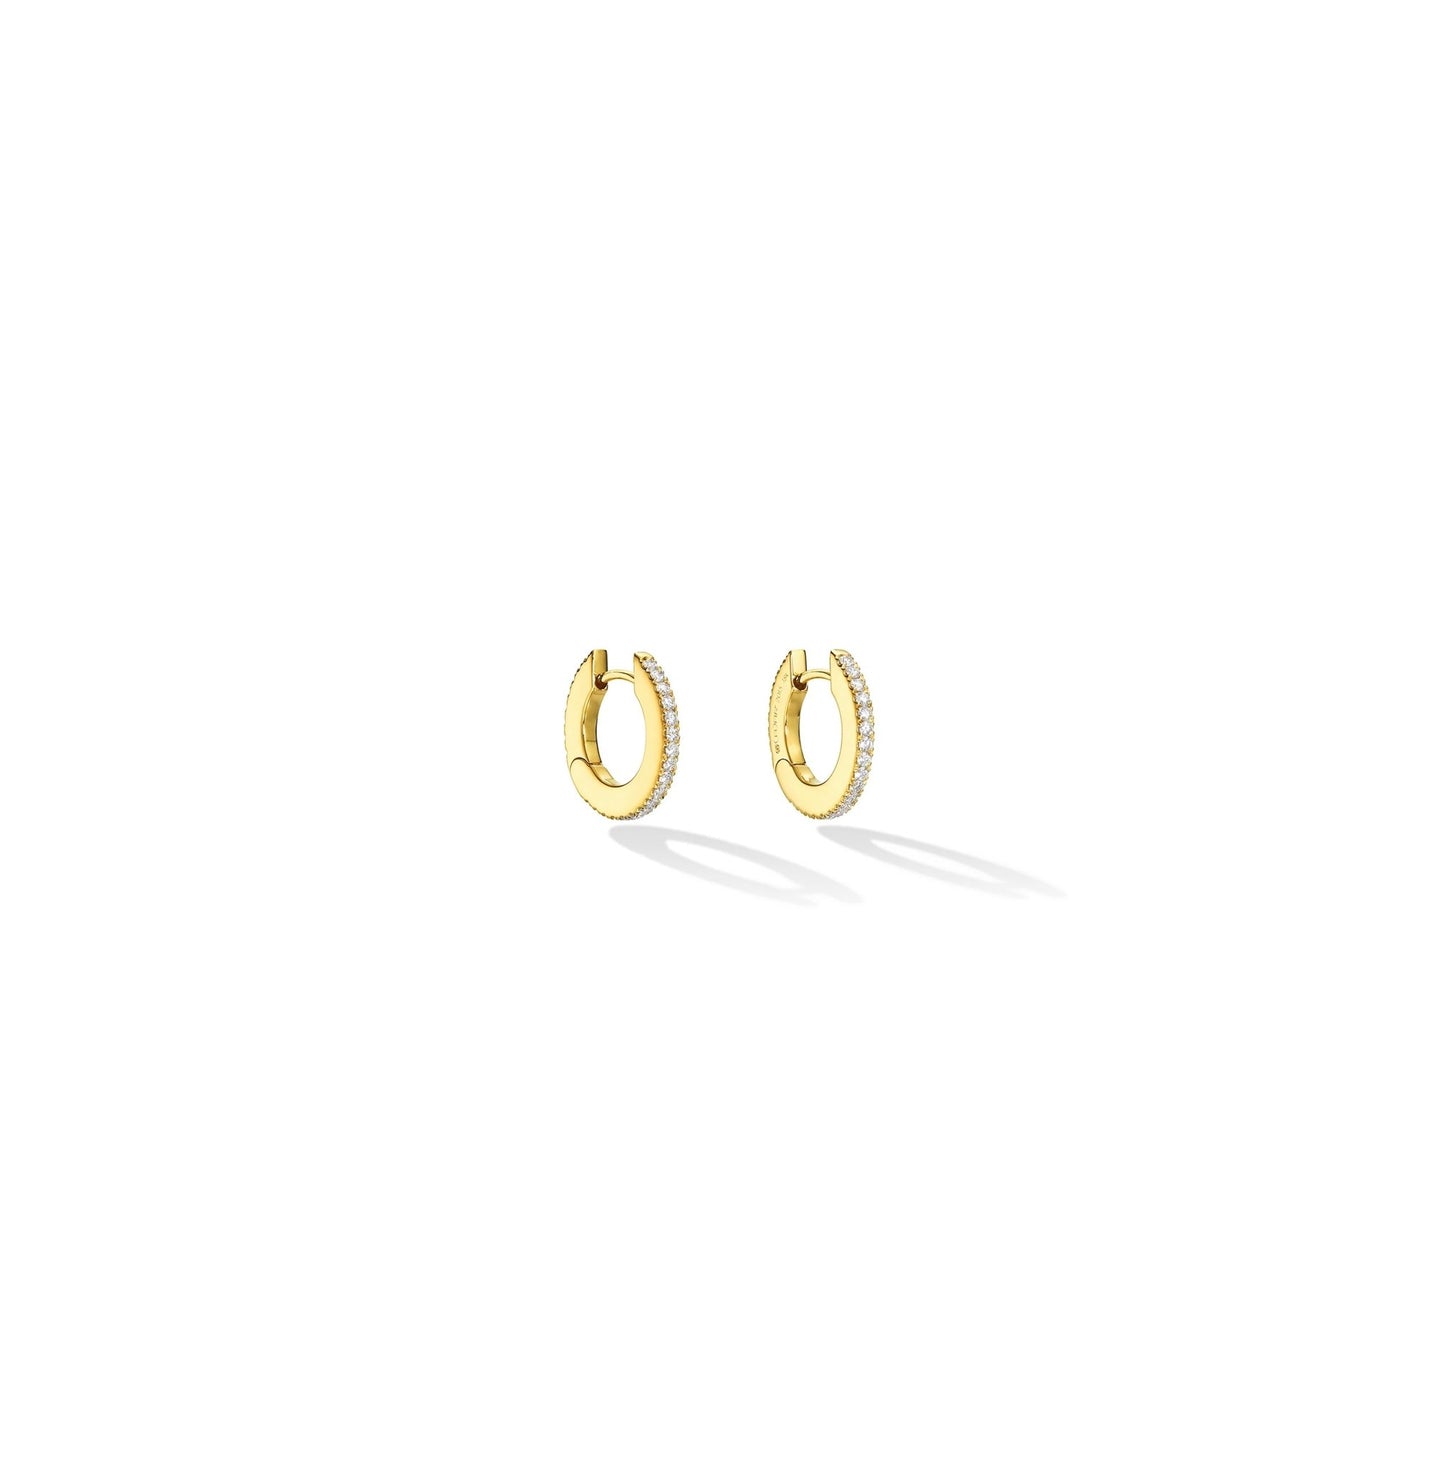 Small Yellow Gold Solo Hoop Earrings with White Diamonds - CADAR